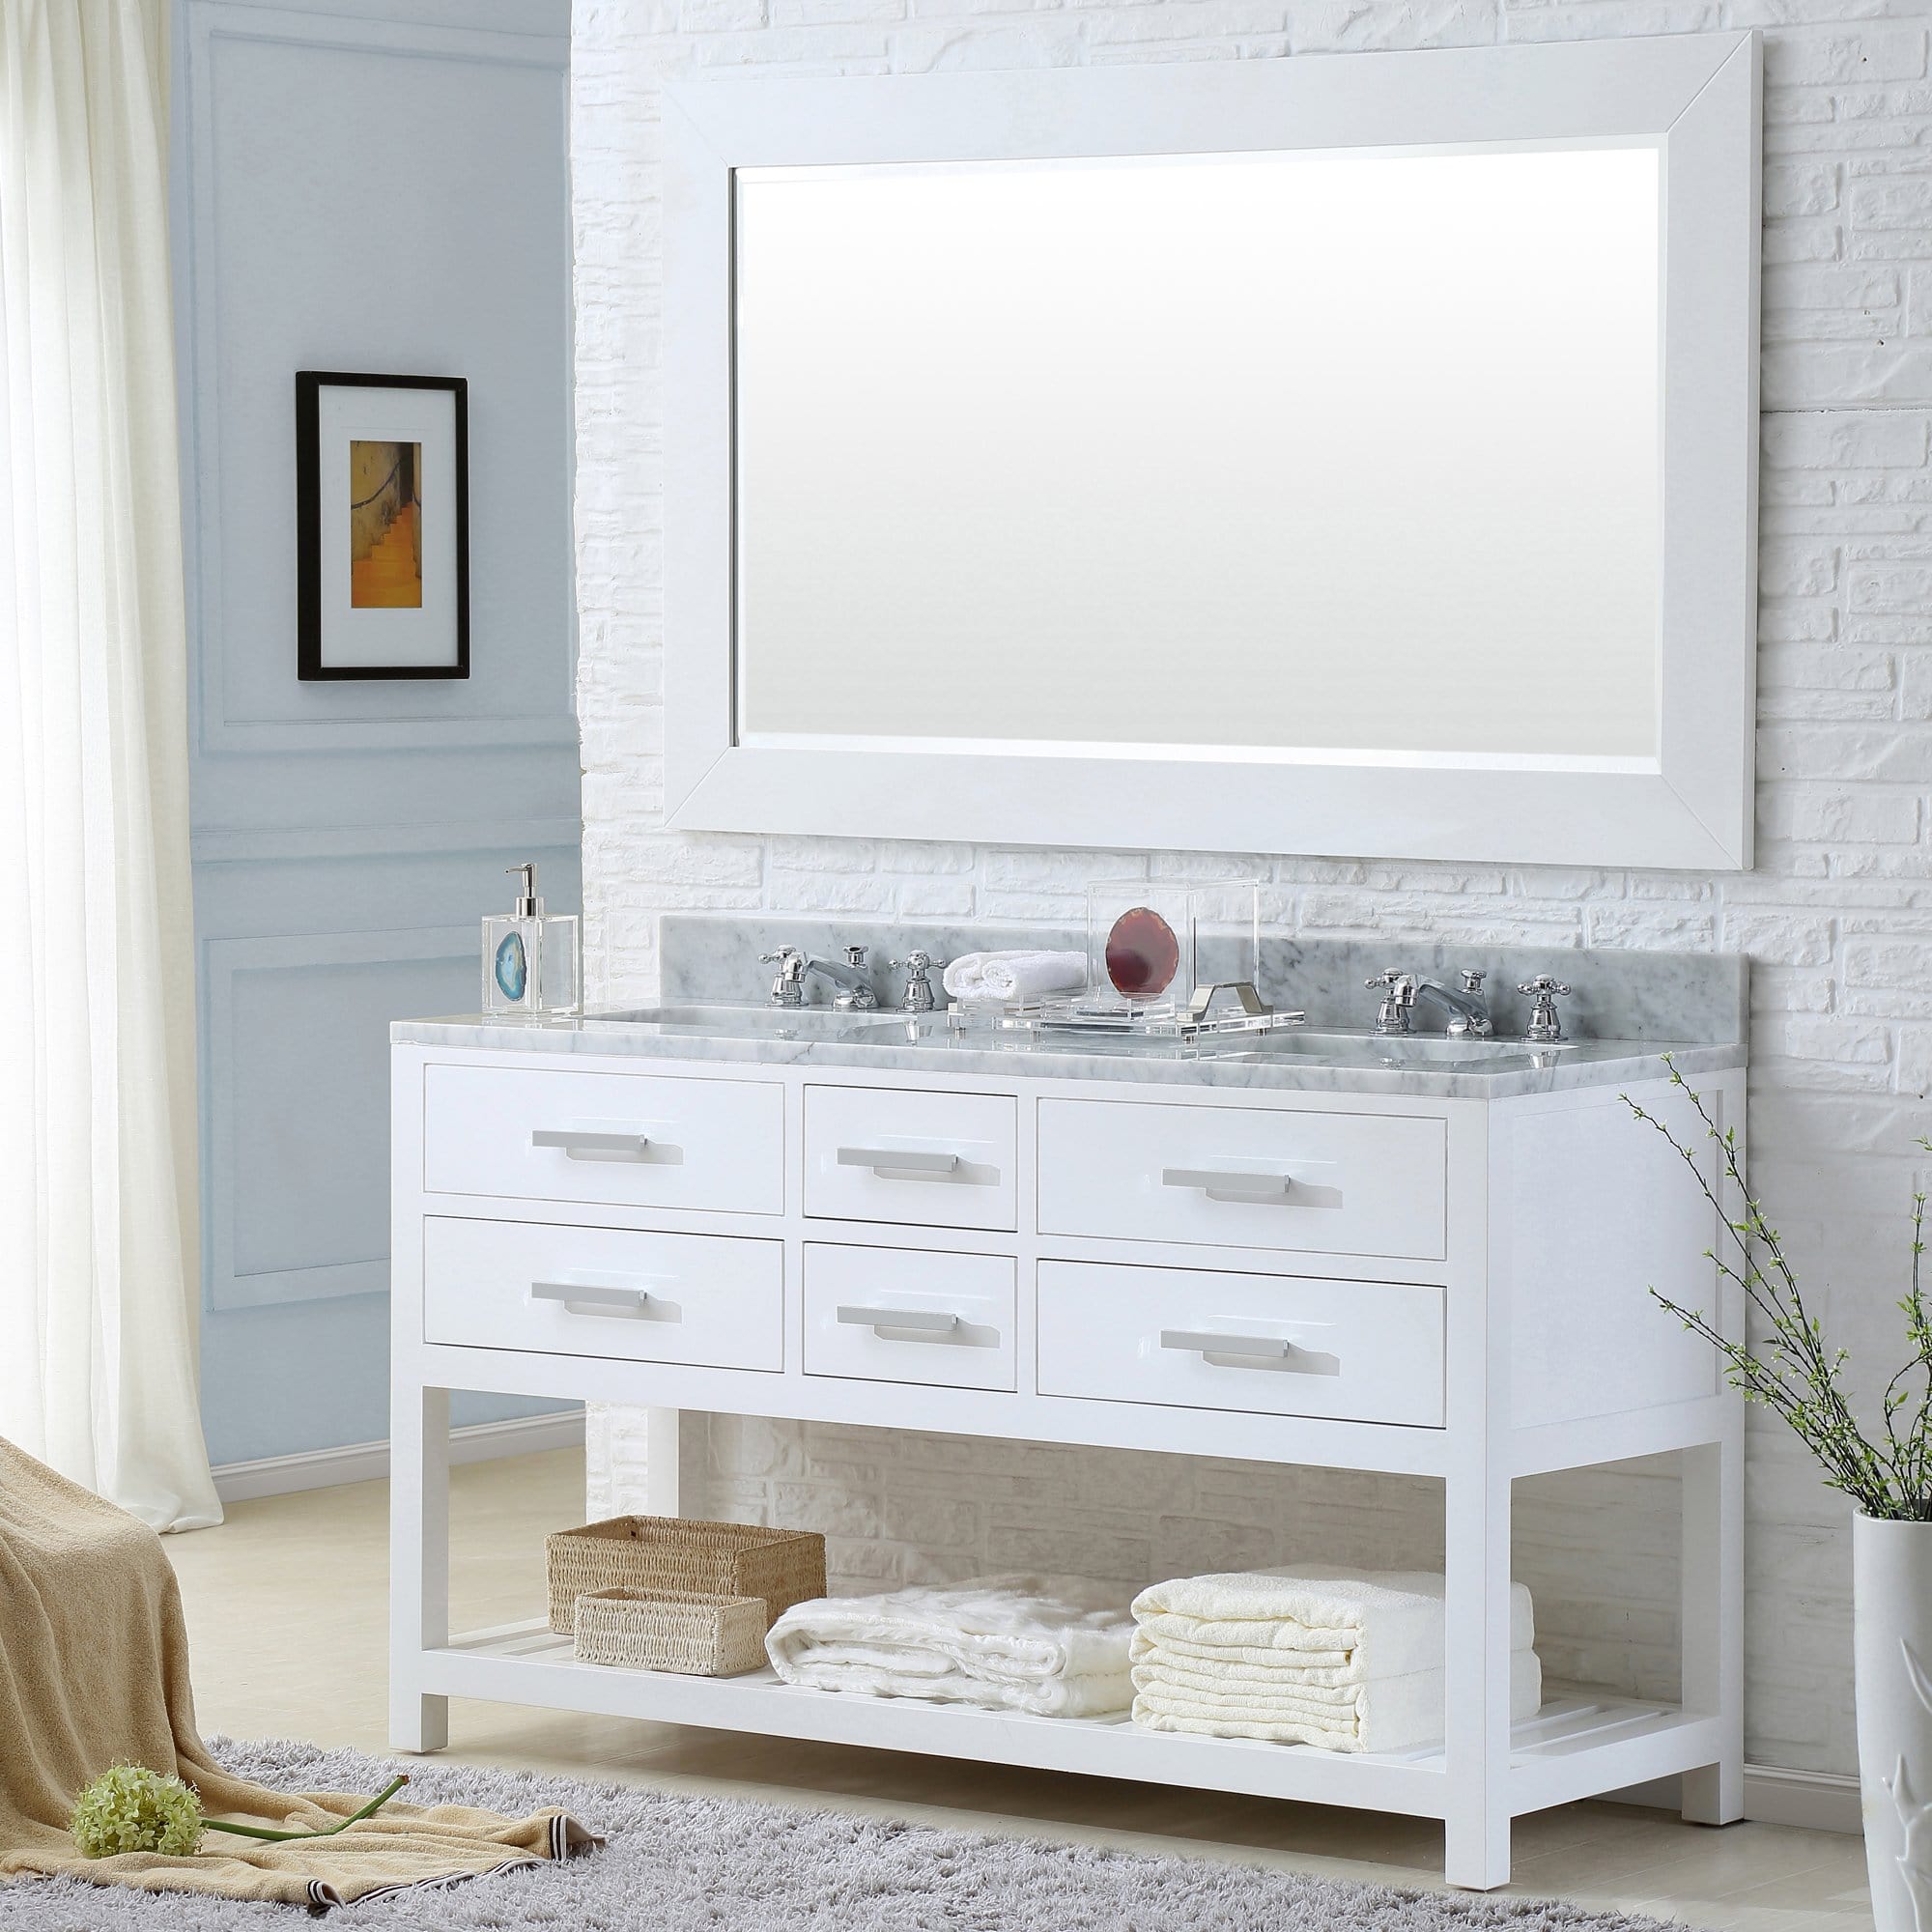 Water Creation 60 Inch Pure White Double Sink Bathroom Vanity With Matching Framed Mirror From The Madalyn Collection - Molaix700621682509Bathroom vanityMA60CW01PW-R60000000